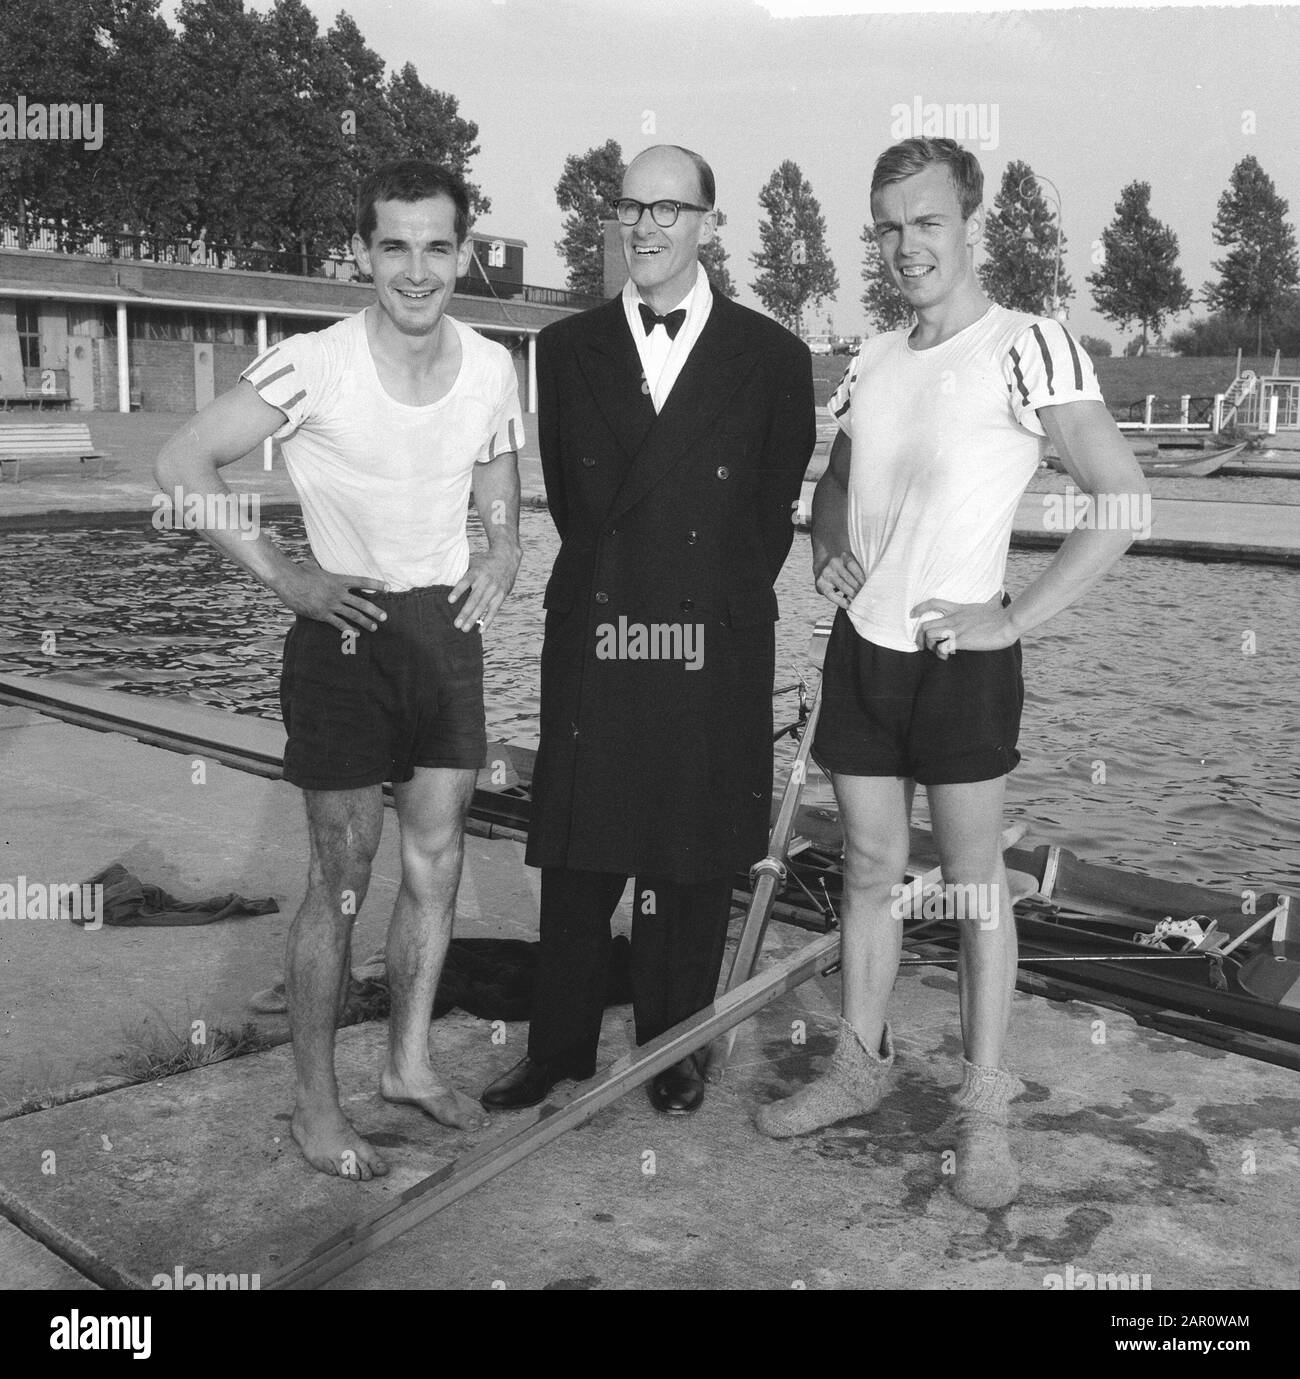 National championships rowing at the Bosbaan for men two without mate Blaisse and Veenemans Date: 24 July 1964 Location: Amsterdam, Amsterdamse Bos, Bosbaan, Noord-Holland Keywords: CHAMPIES, ROWING, helmsmen Stock Photo